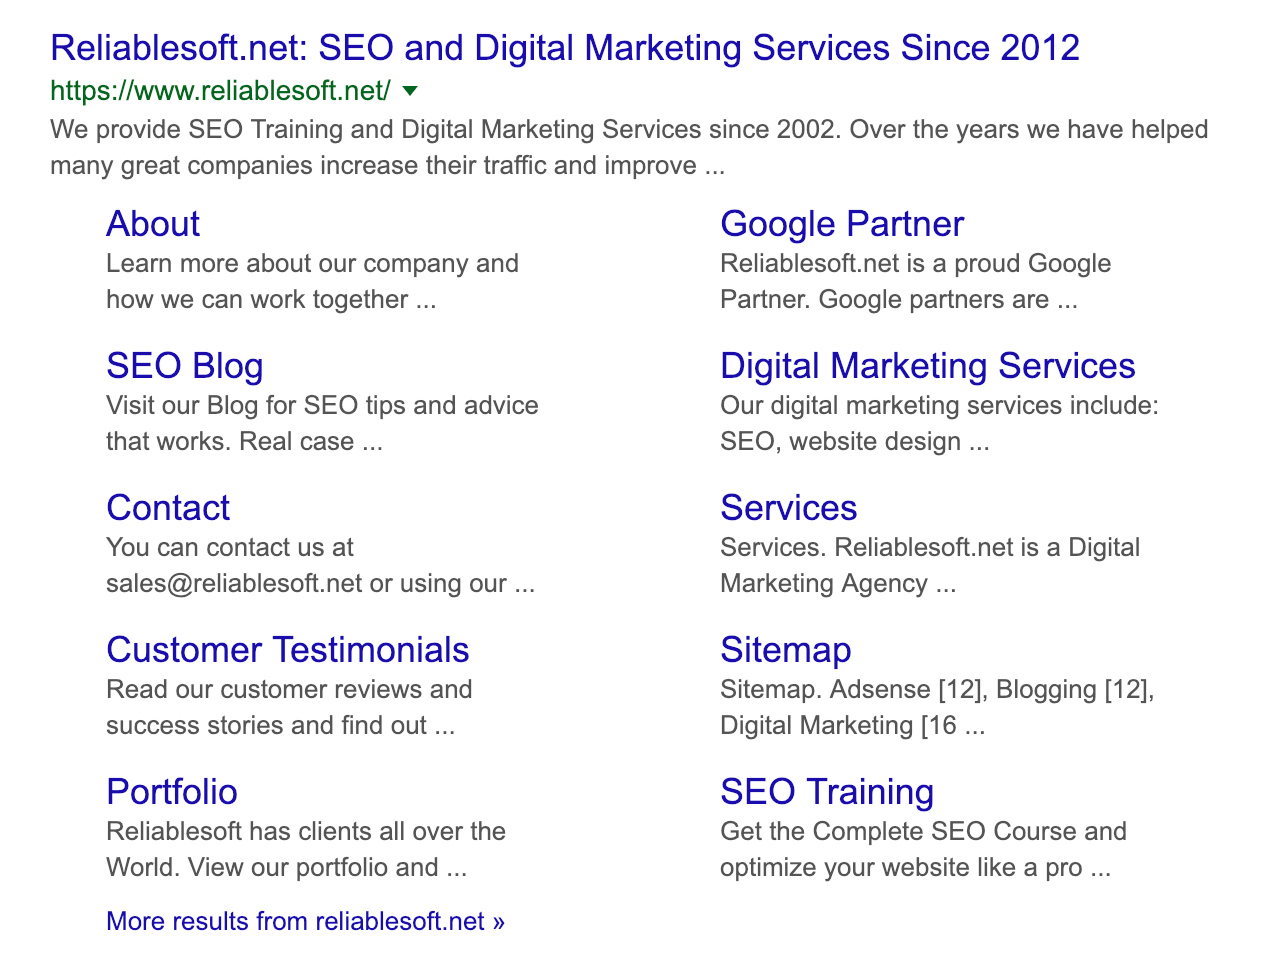 Sitelinks in Google Search Results